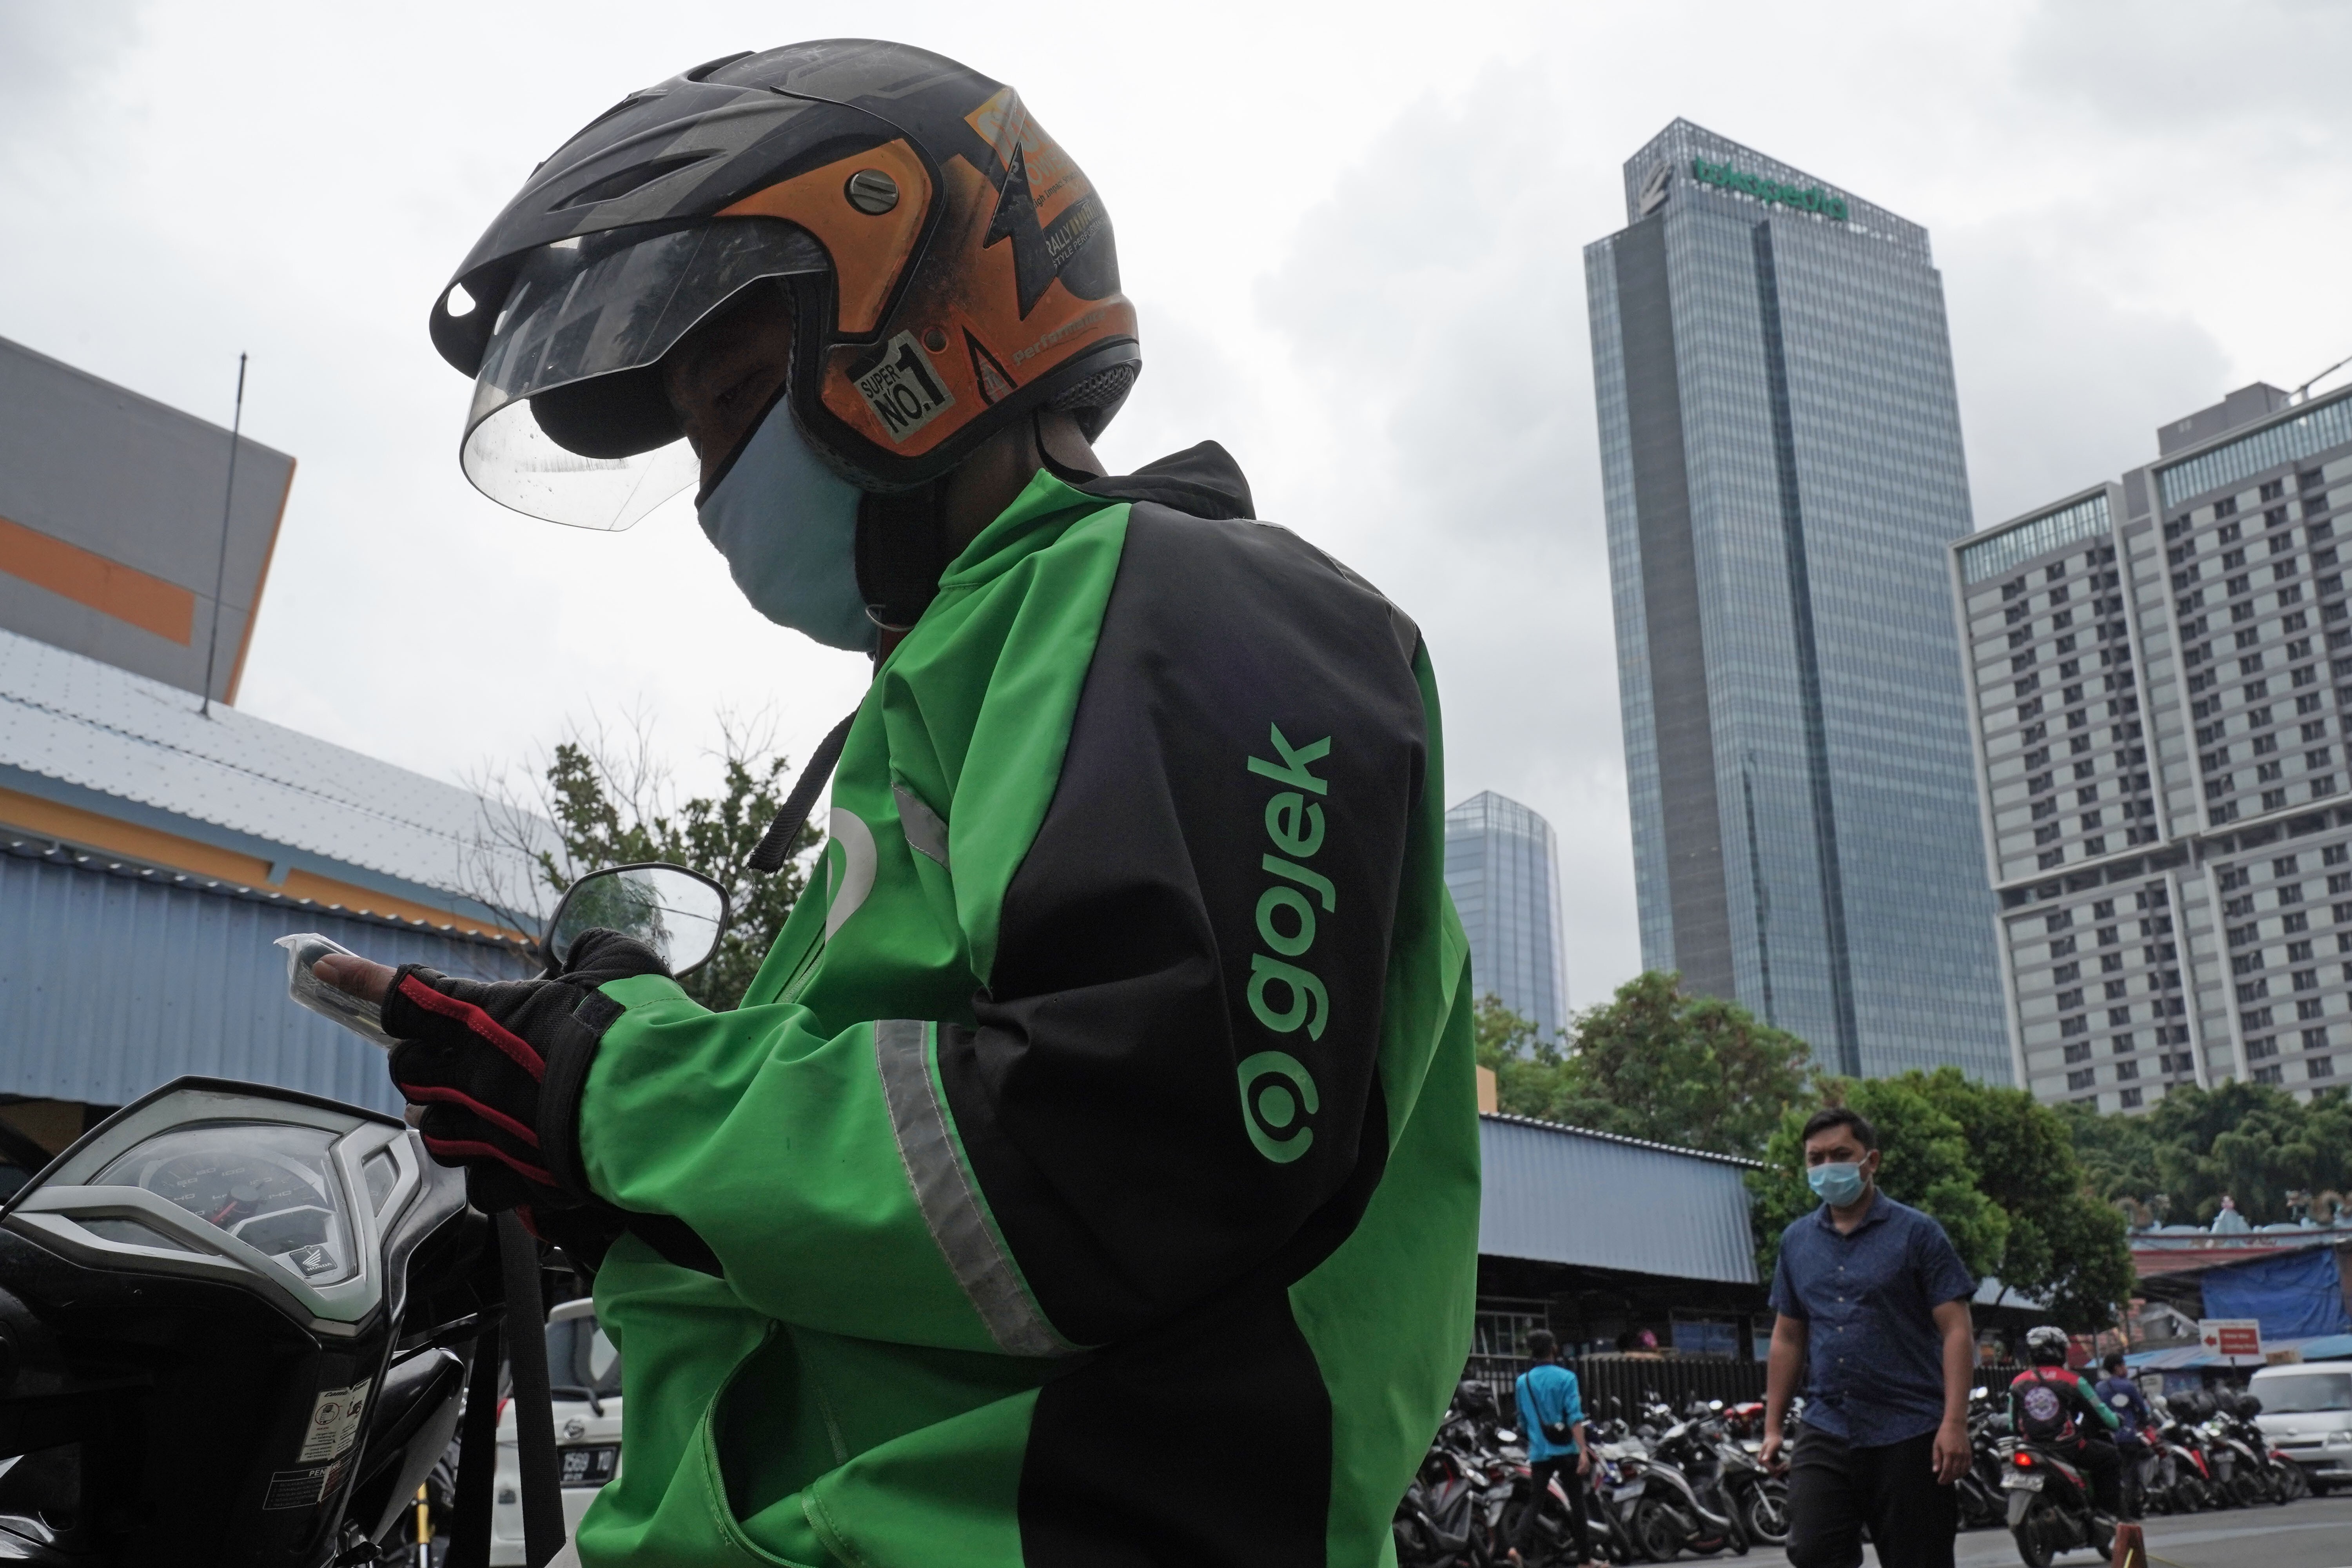 A Gojek driver checks his mobile phone in Jakarta in January. Southeast Asia technology companies Gojek and Tokopedia plan to combine in the biggest merger ever in Indonesia. Photo: Bloomberg